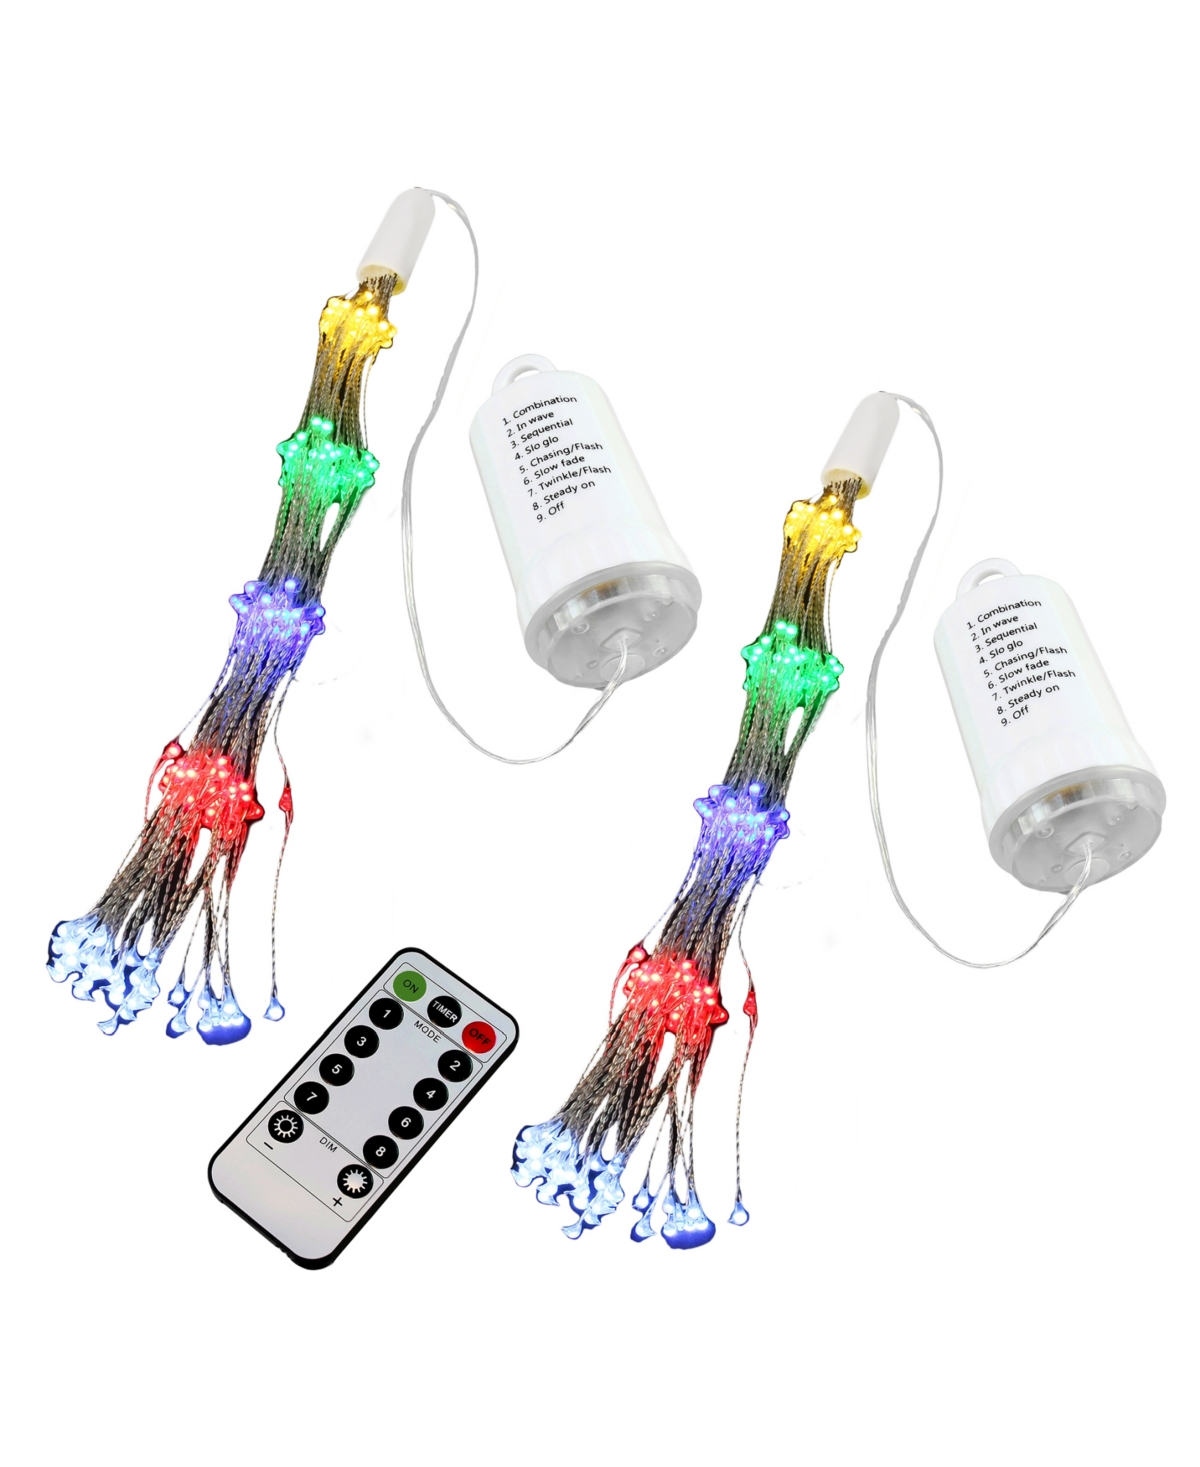 Jh Specialties Inc/lumabase Lumabase Battery Operated Starburst Lights With Remote Control, Set Of 2 In Multi